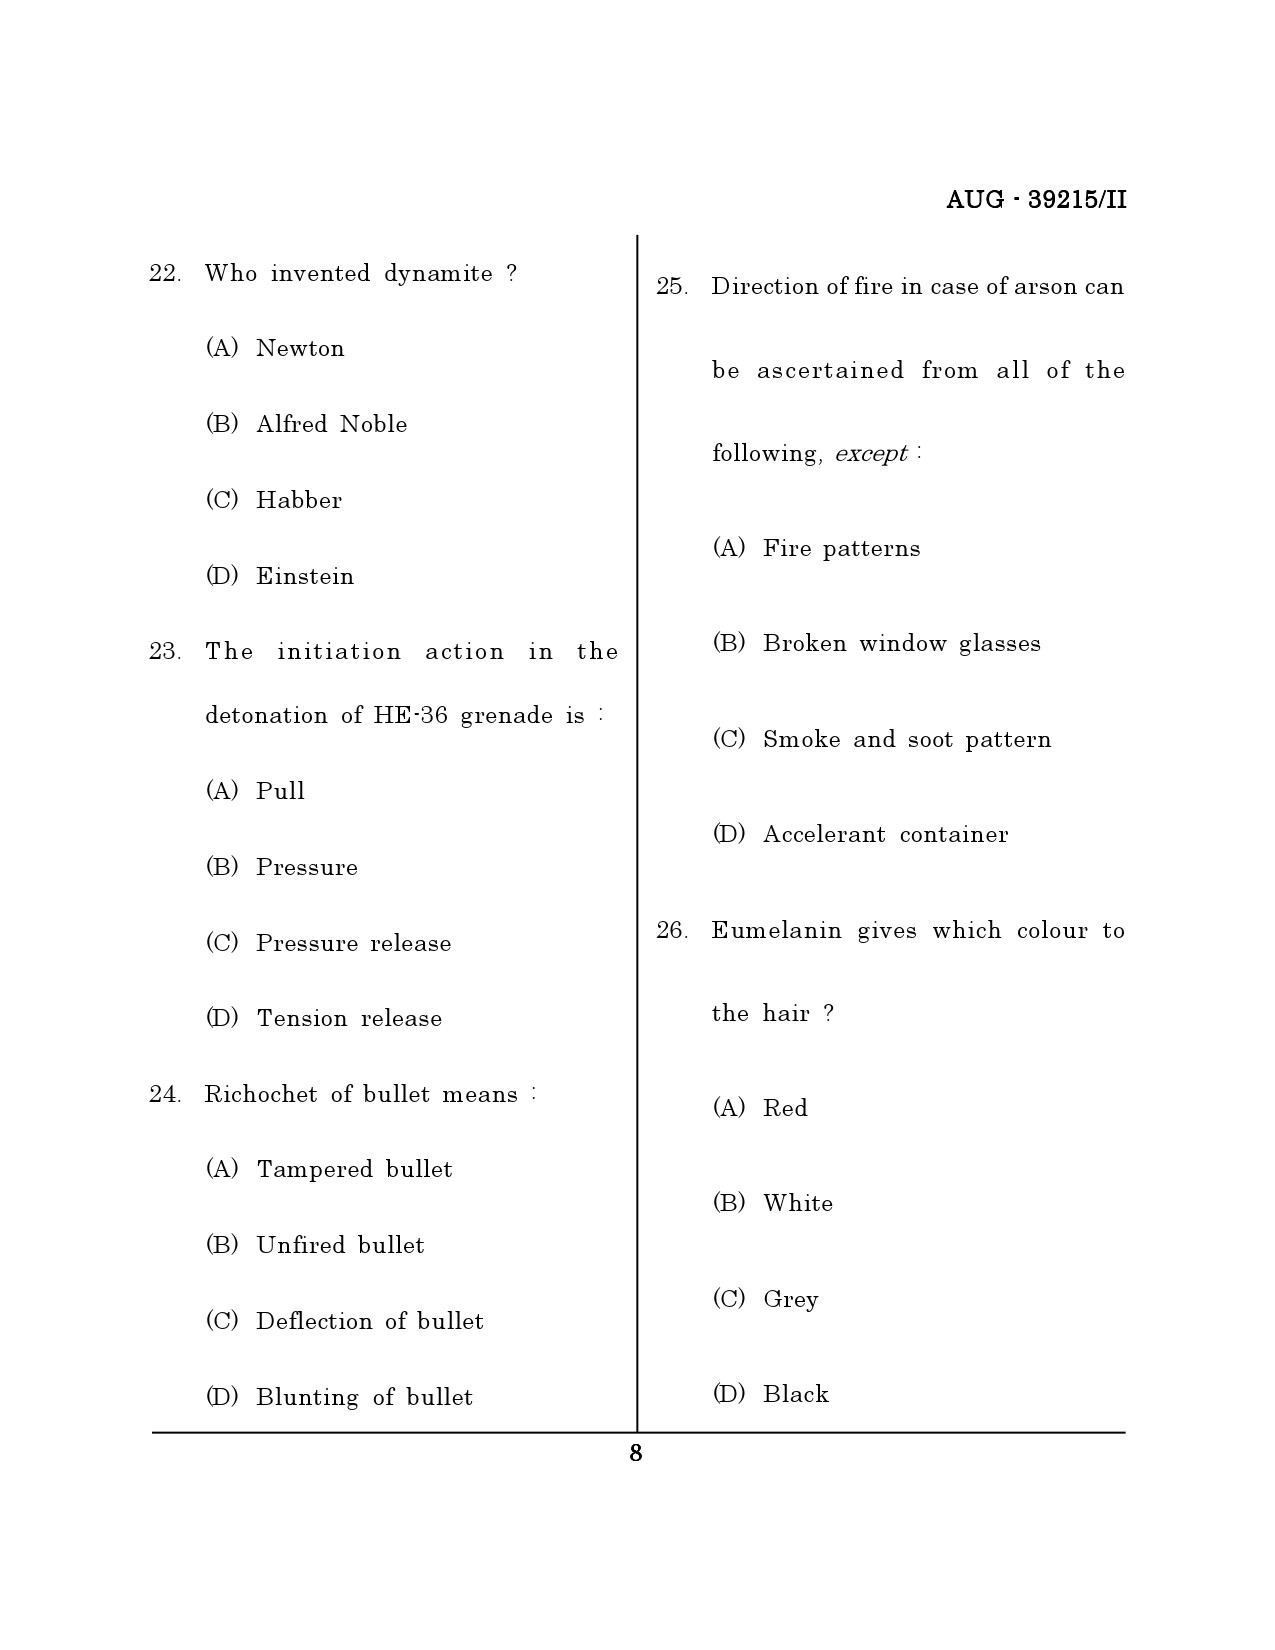 Maharashtra SET Forensic Science Question Paper II August 2015 7